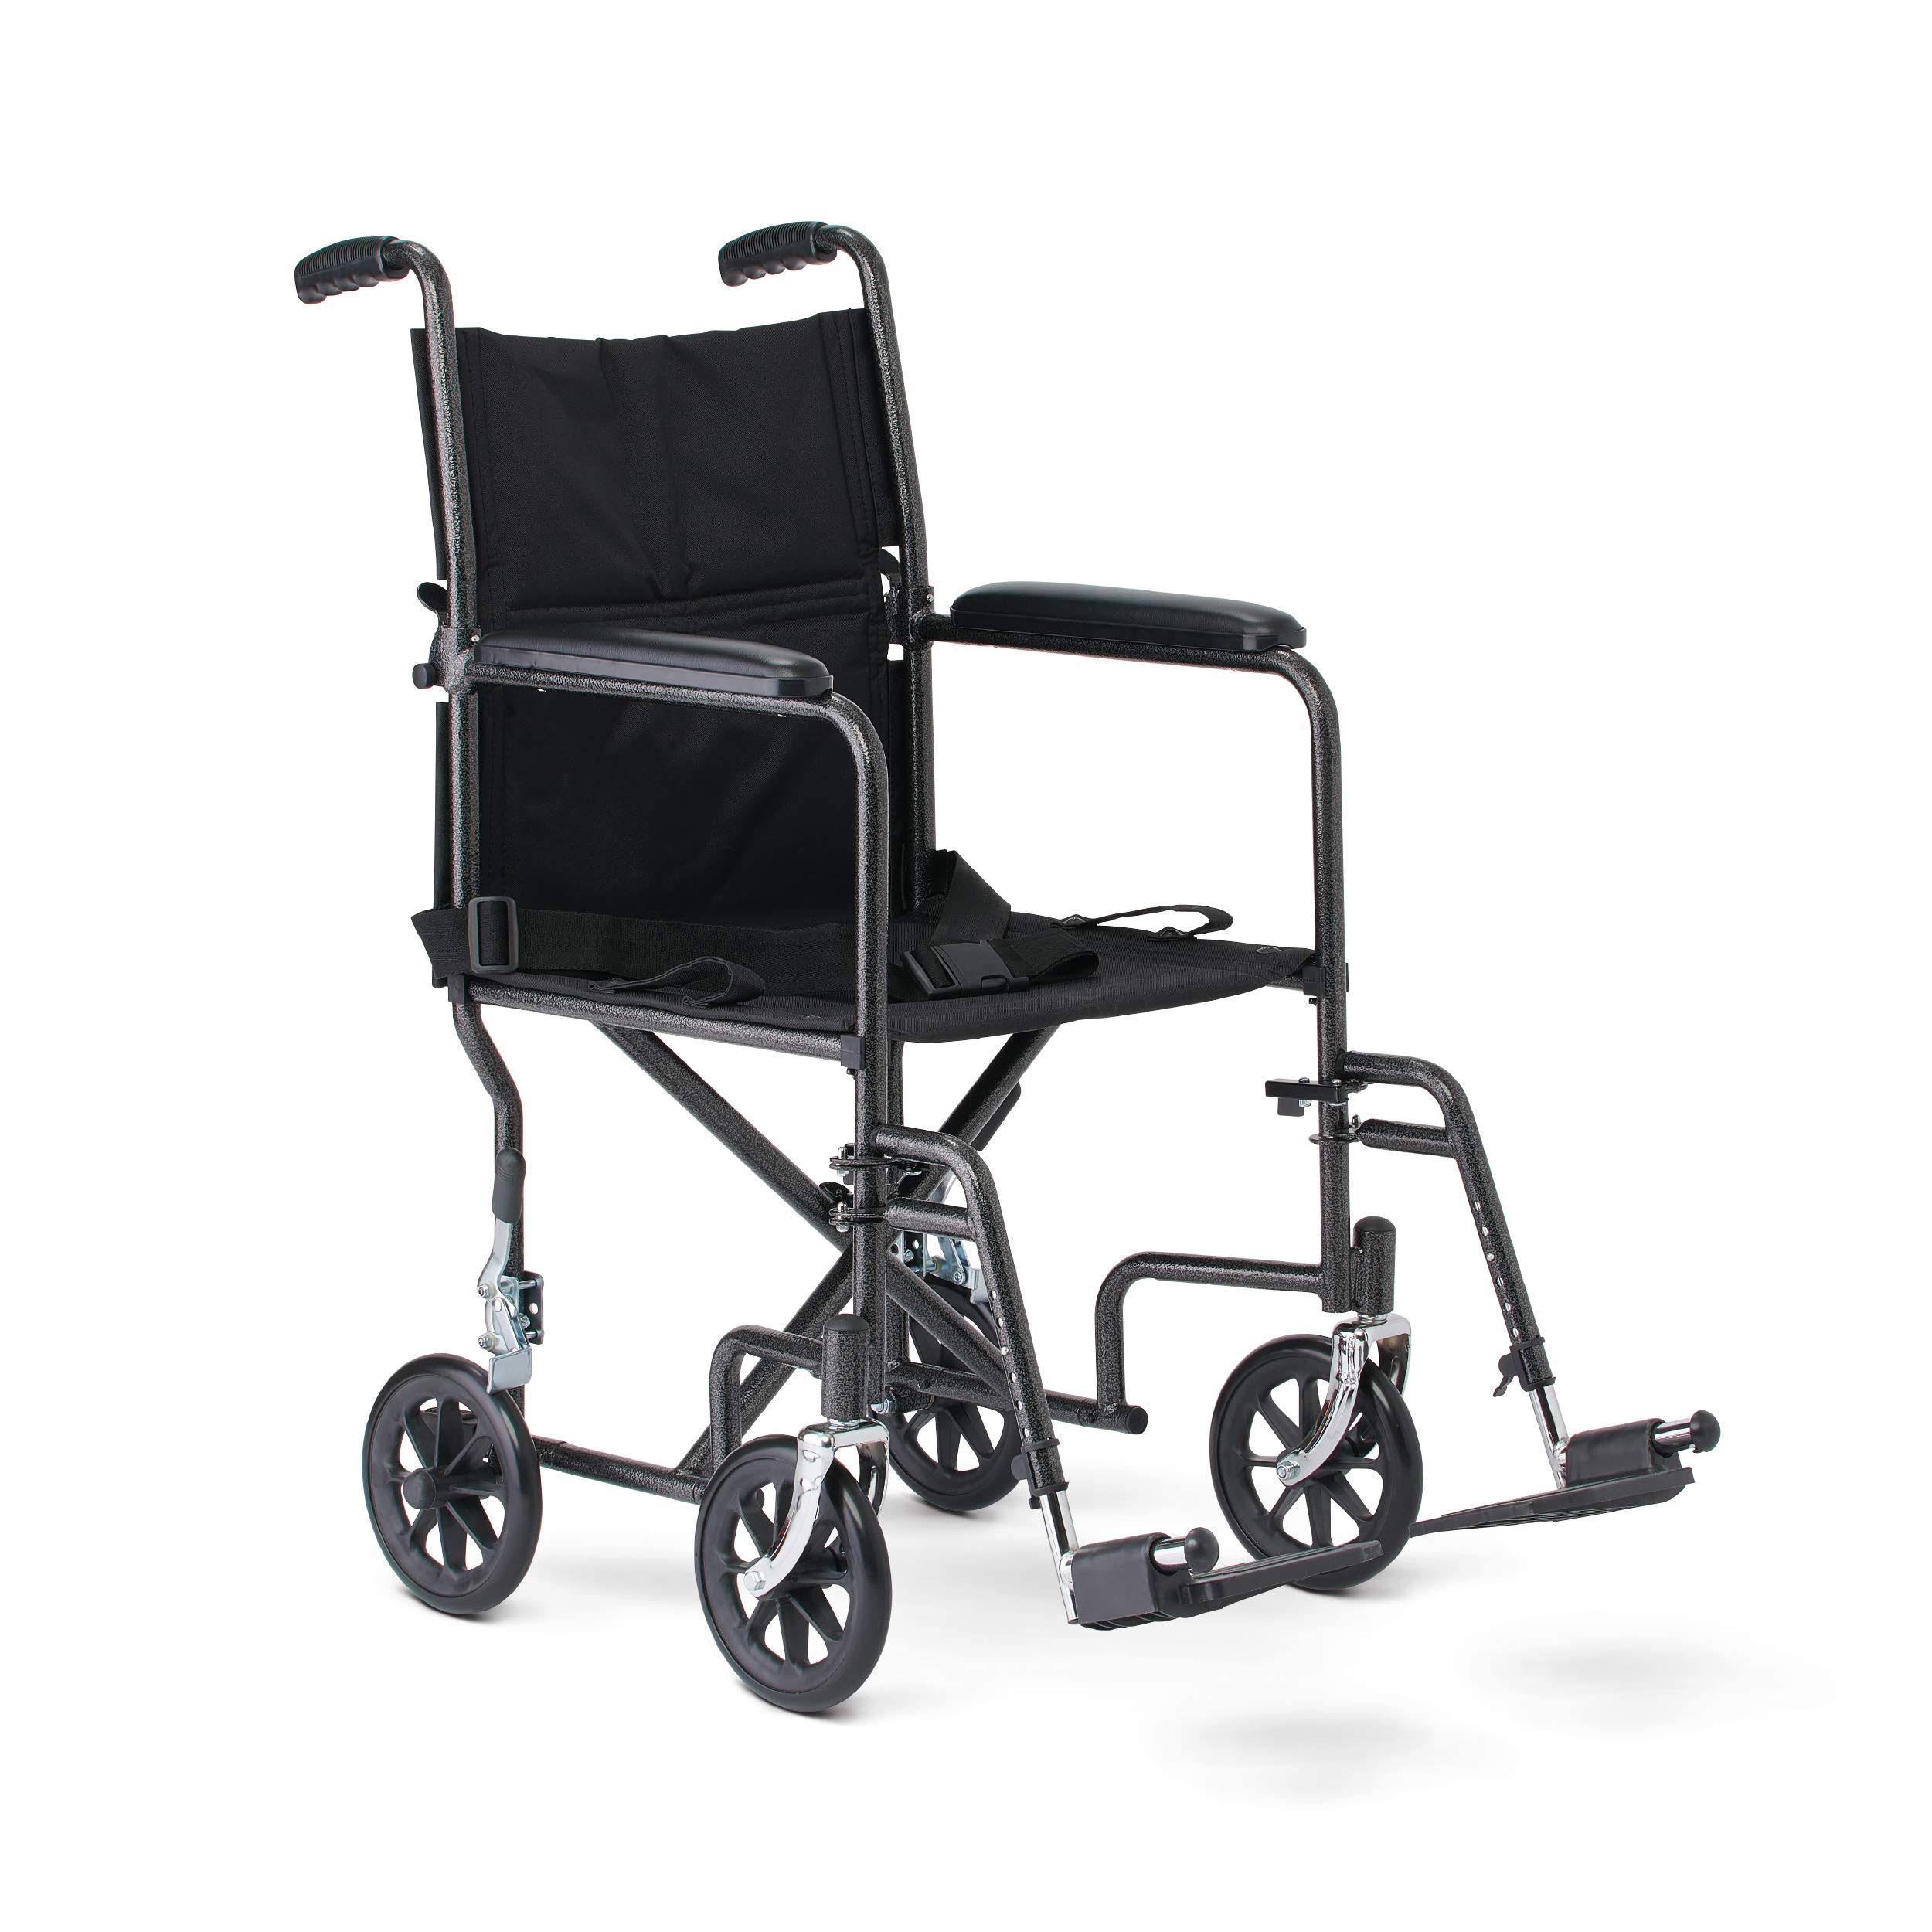 Medline Steel Transport Chair, 8-Inch Wheels,Light Weight, Full Length Armrests, Swing Away Footrests, Folds Flat, 19-Inch Wide Seat